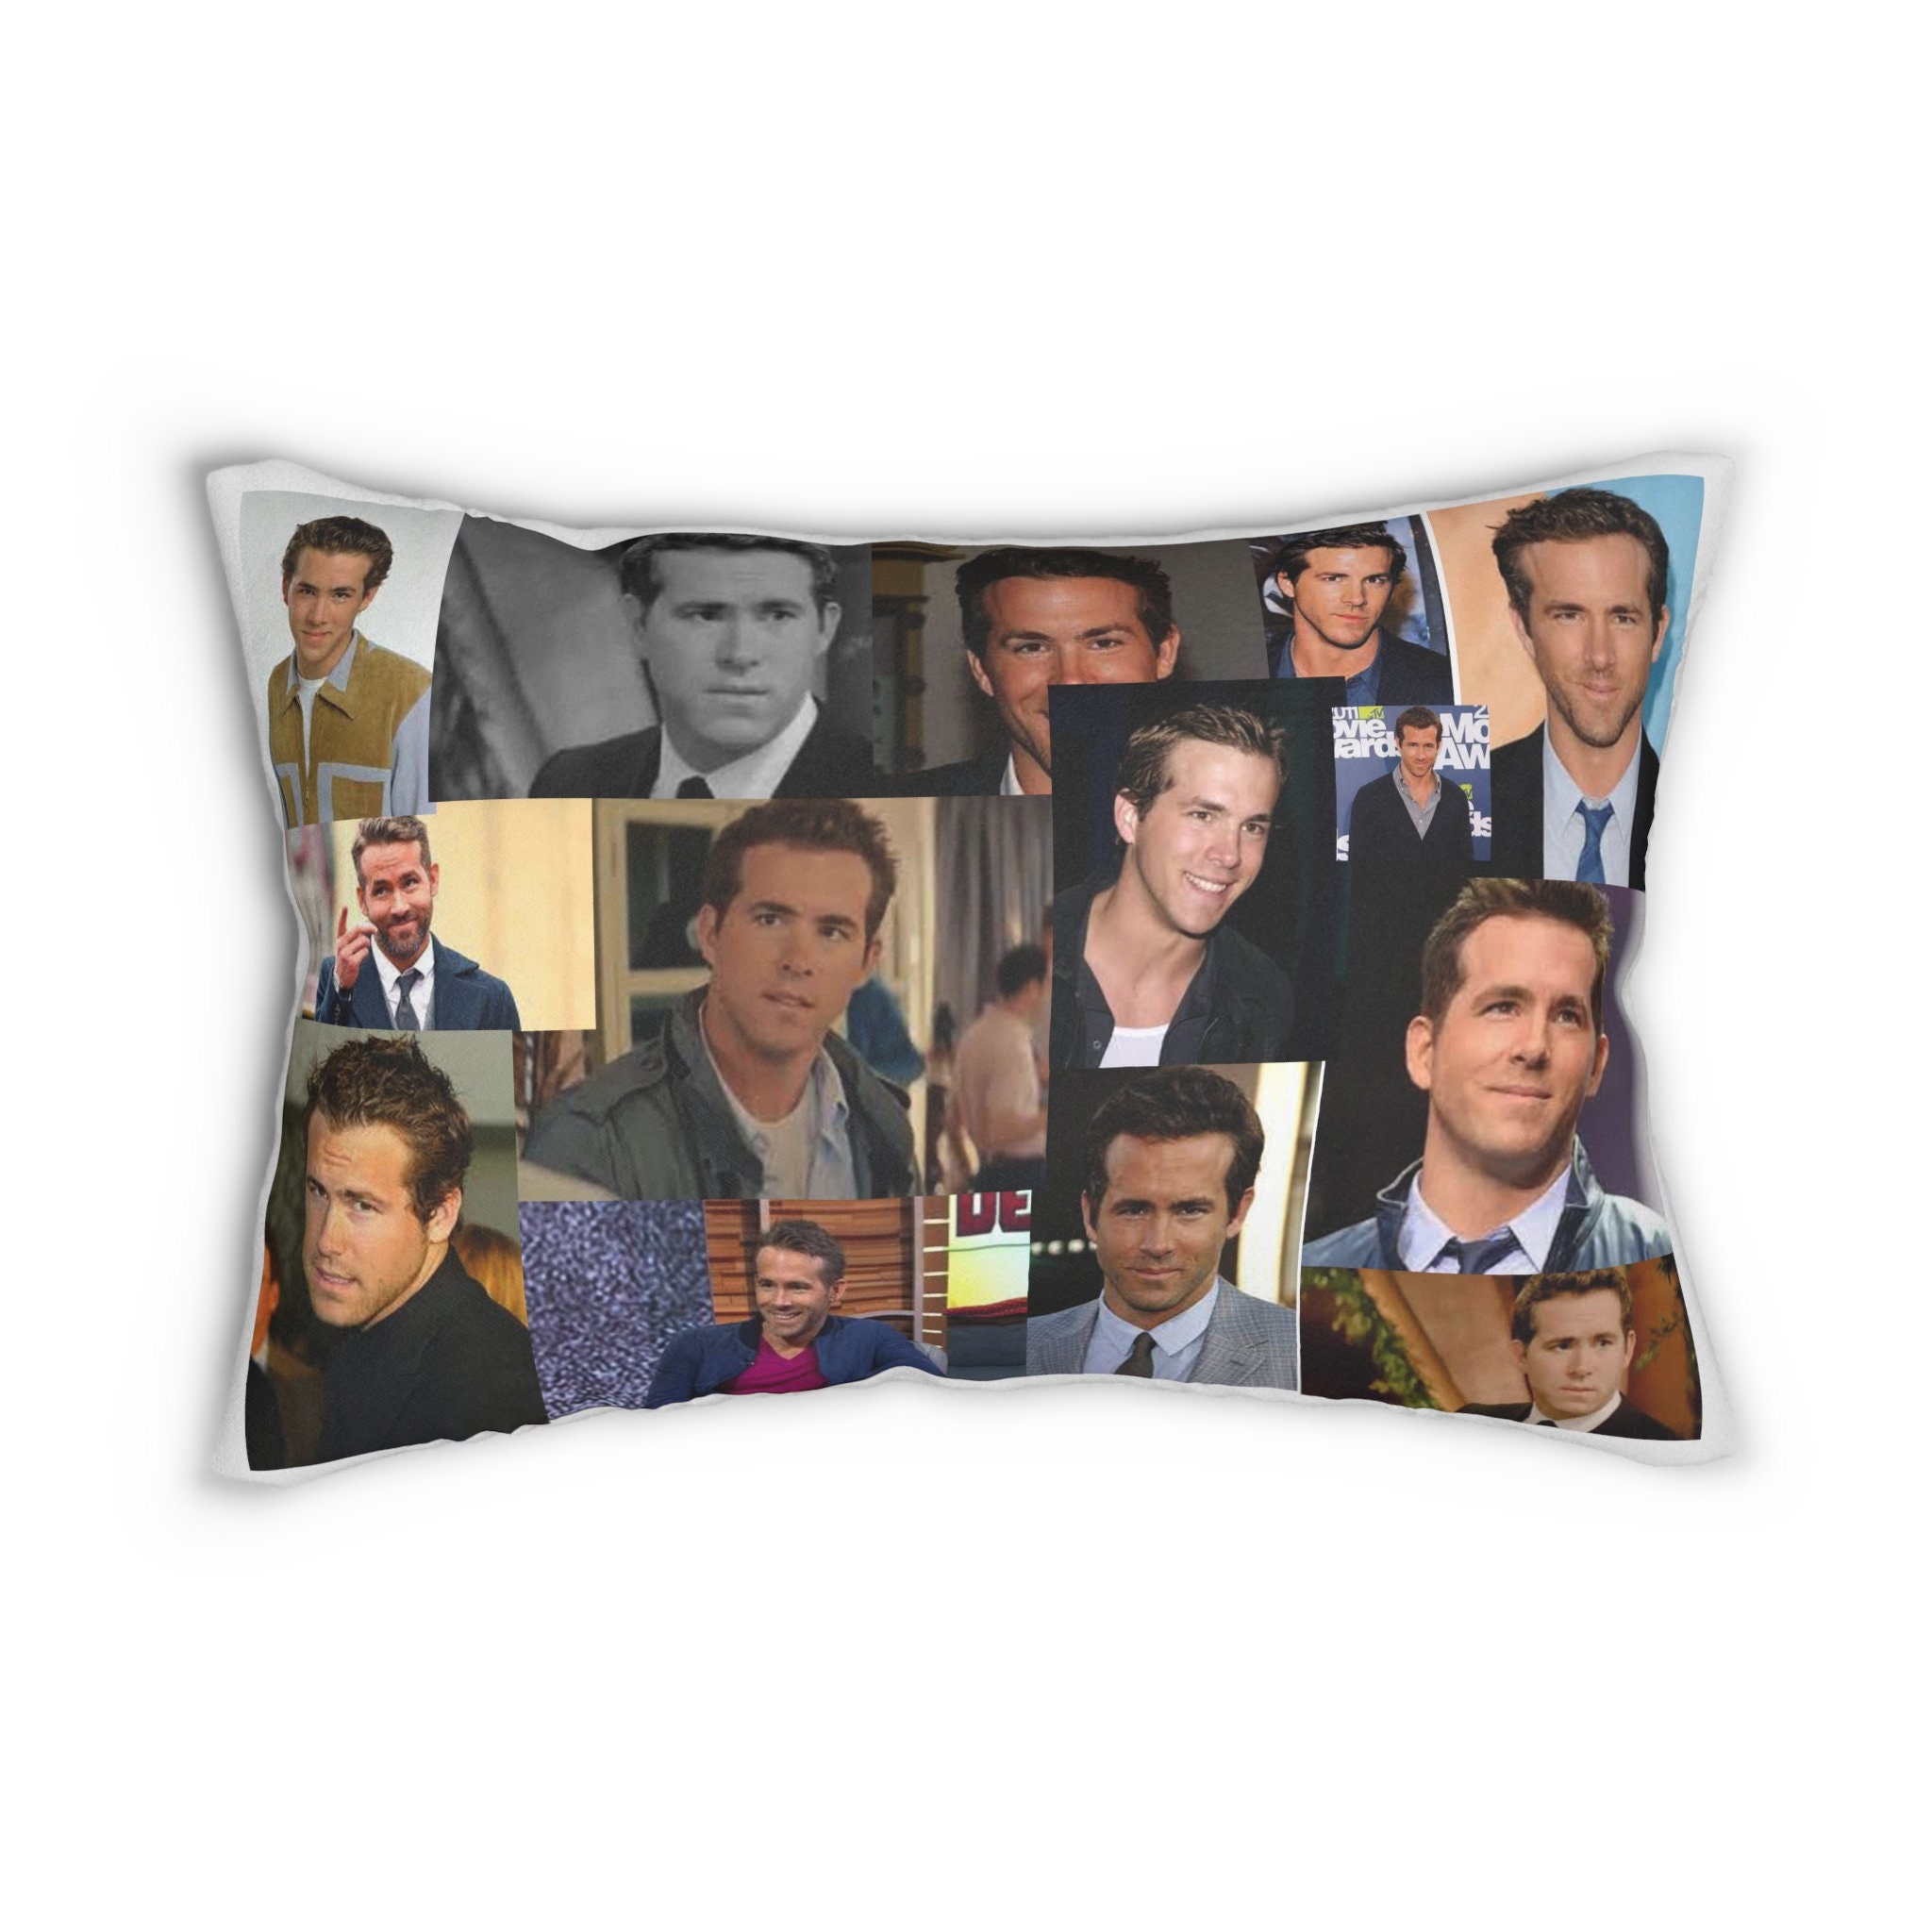 Generic Ryan Reynolds Sexy Pillowcase,Decor Office Decorative,Funny Gift  for Kids,Interesting Finds,Magic Mermaid Reversible CushionNO Pillow